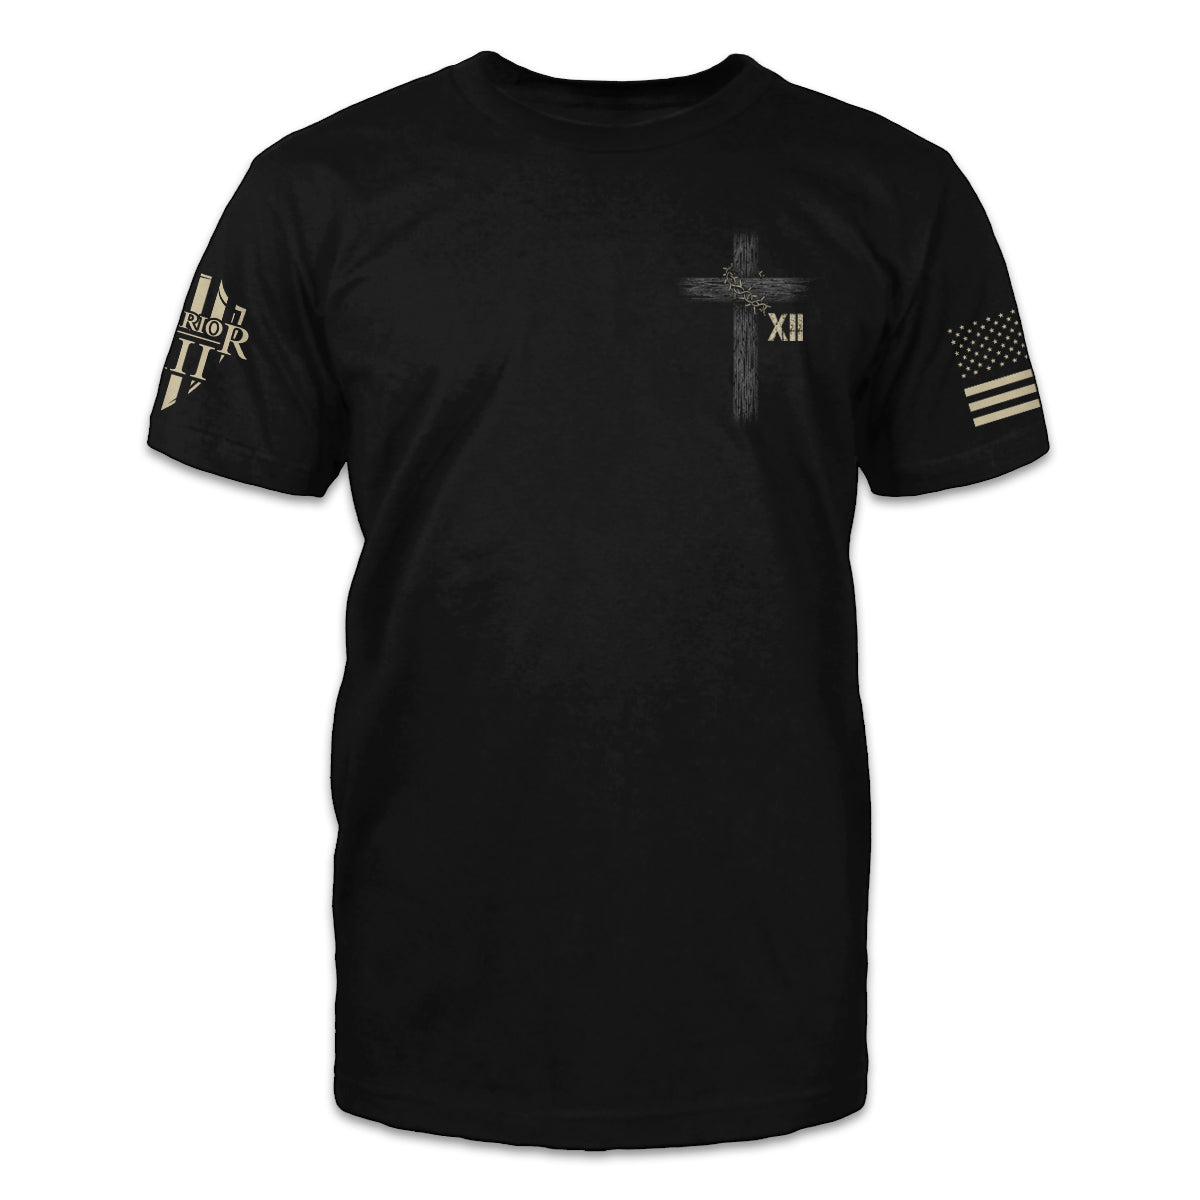 A black t-shirt with a cross and roman numerals XII printed on the front of the shirt.